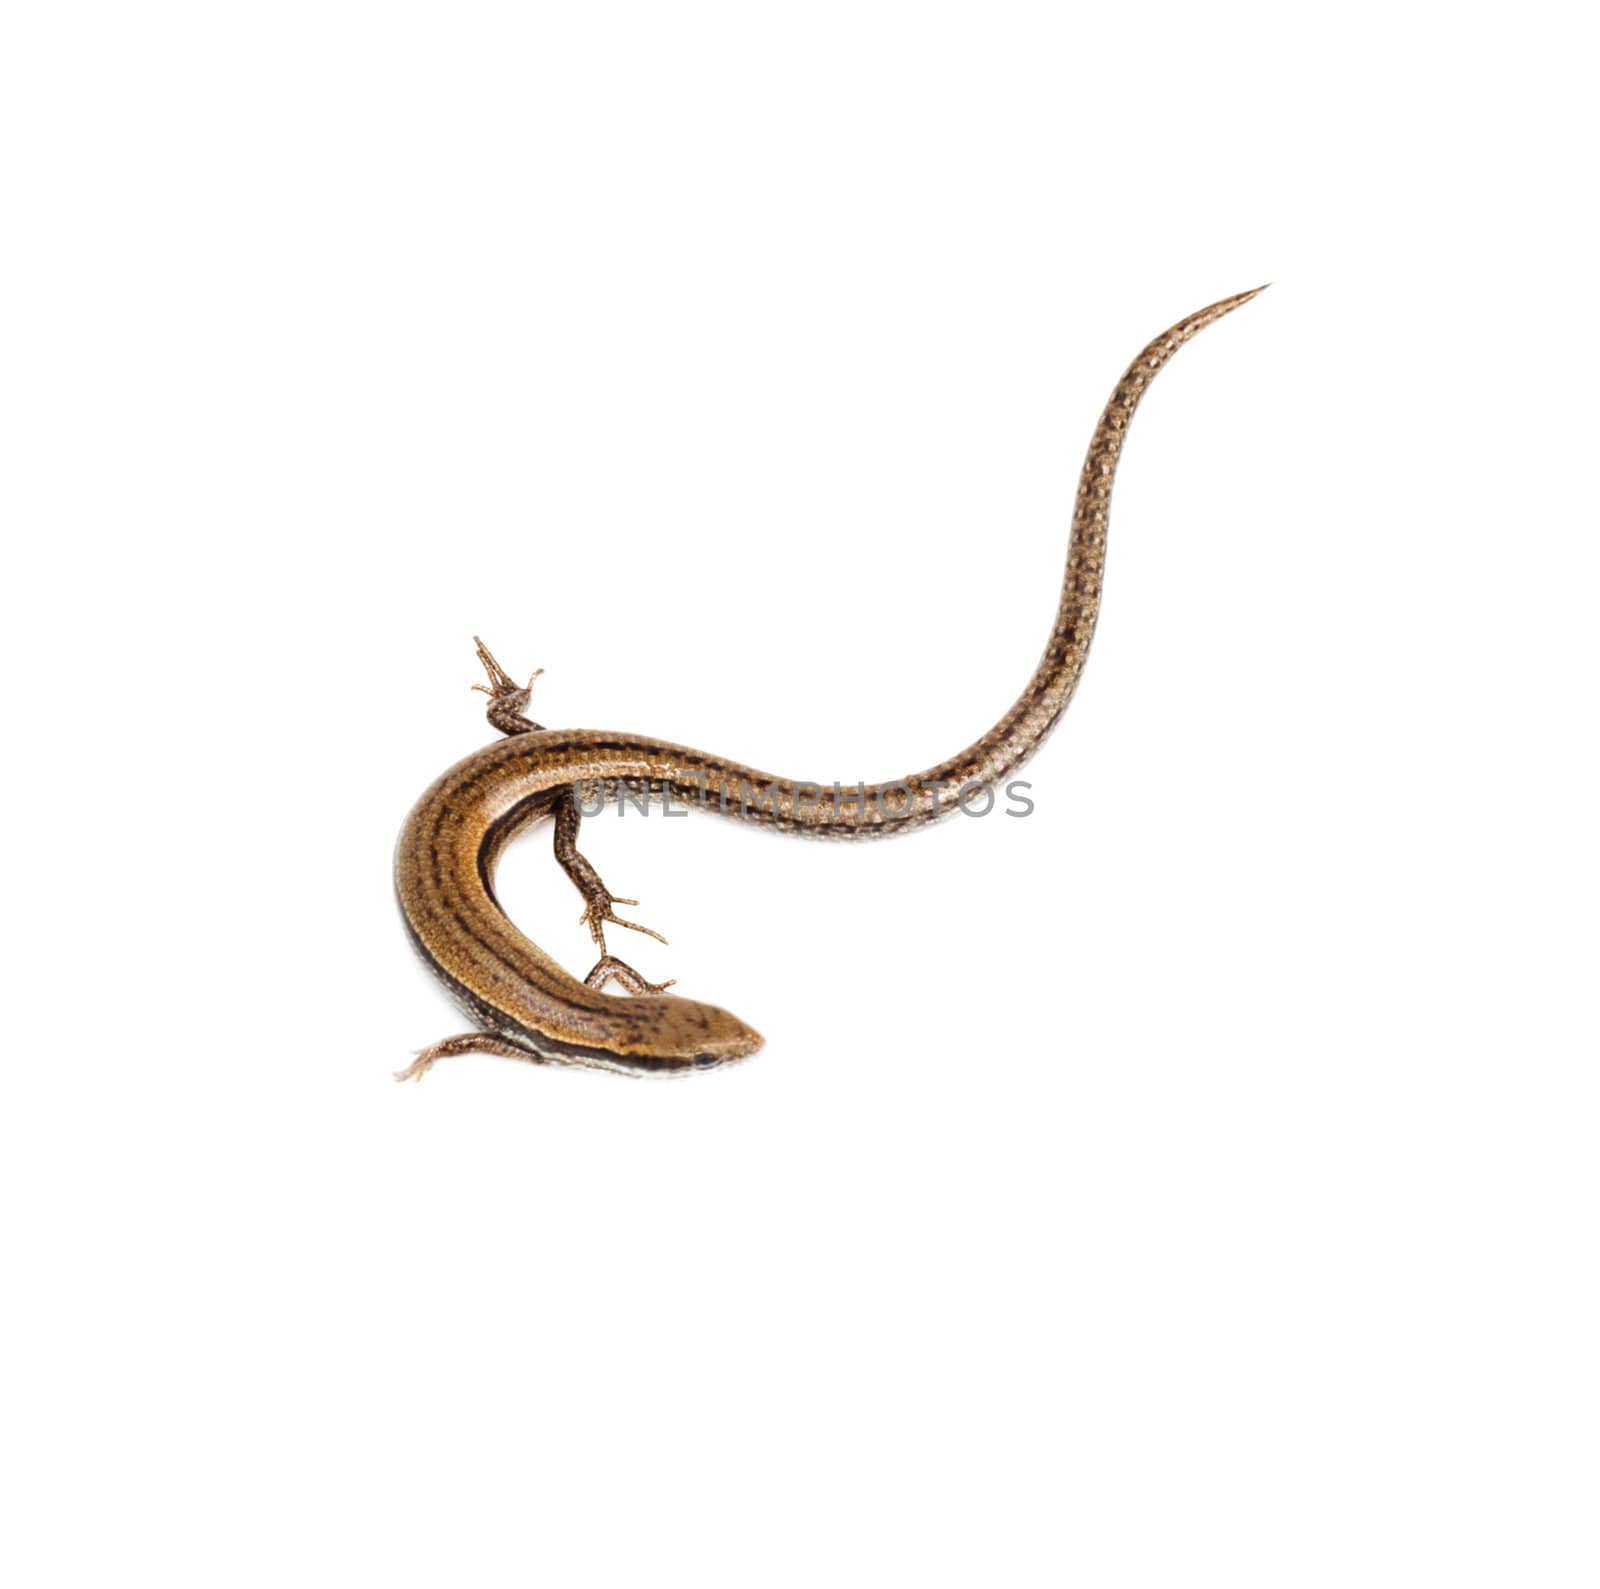 lizard on a white background